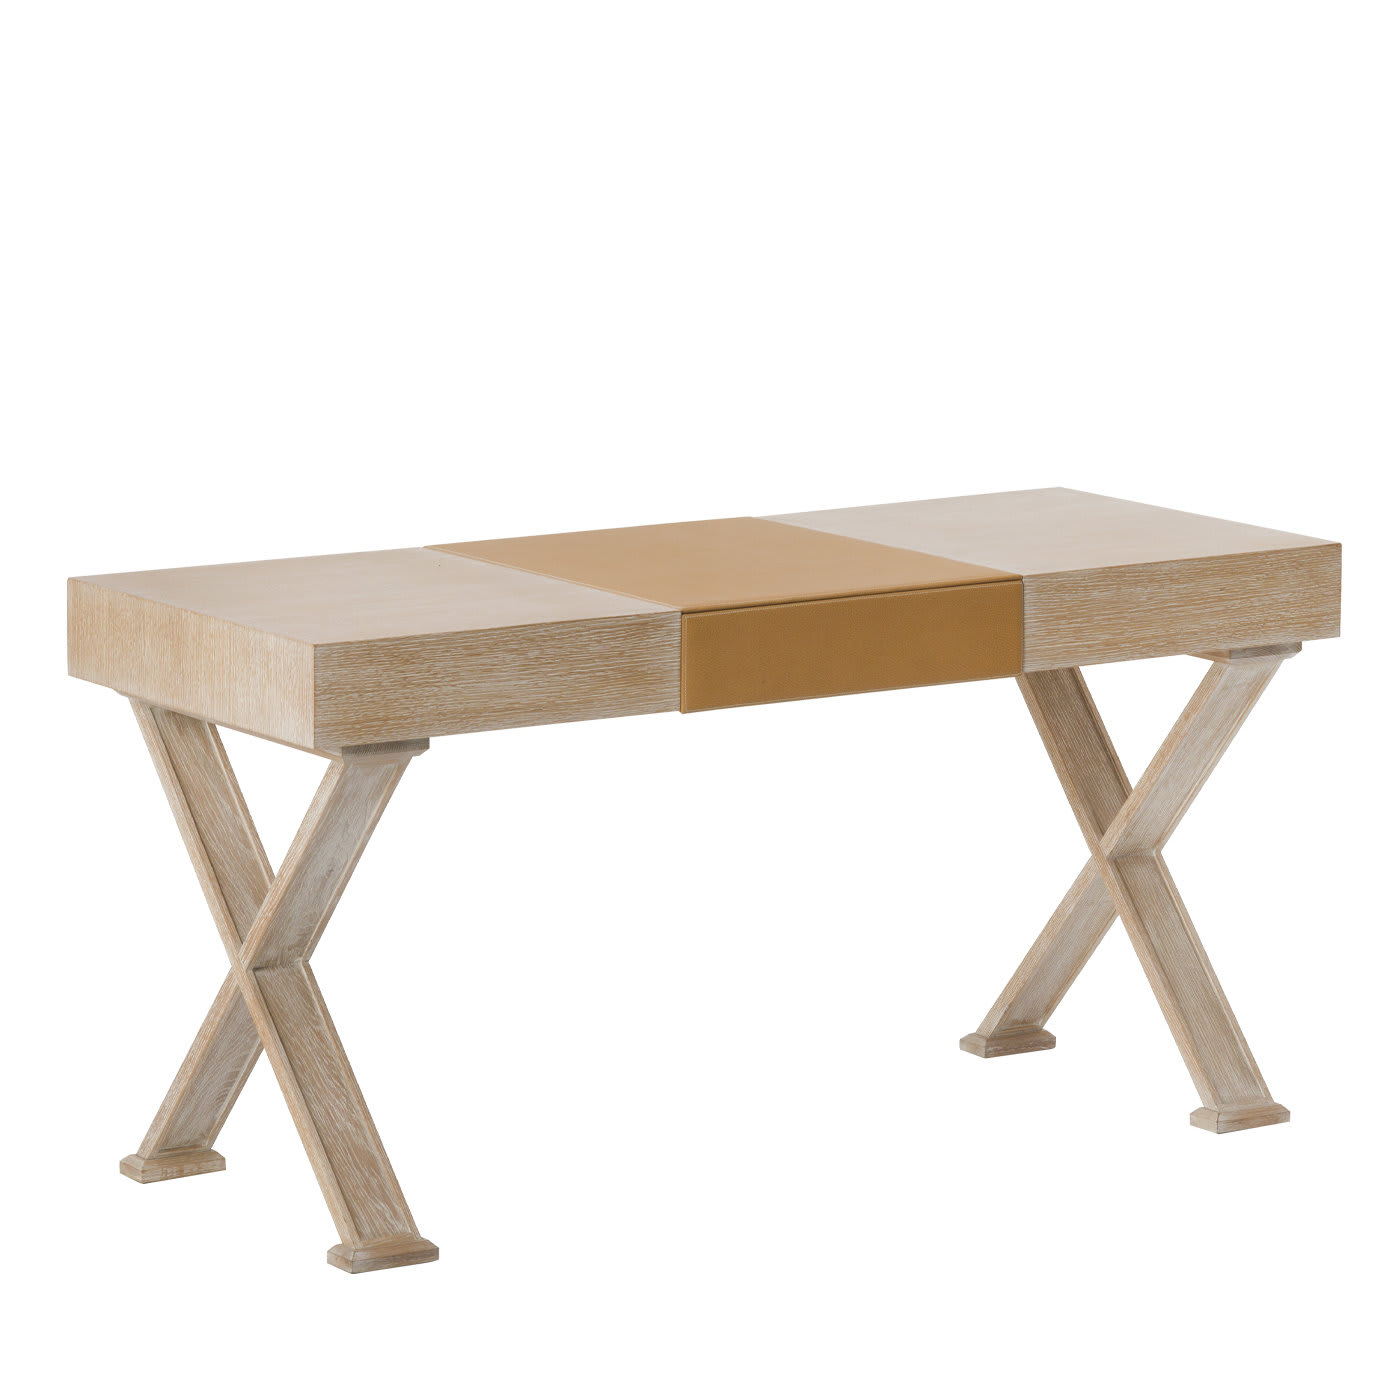 Oak Desk with Leather Hand Pad - Chelini